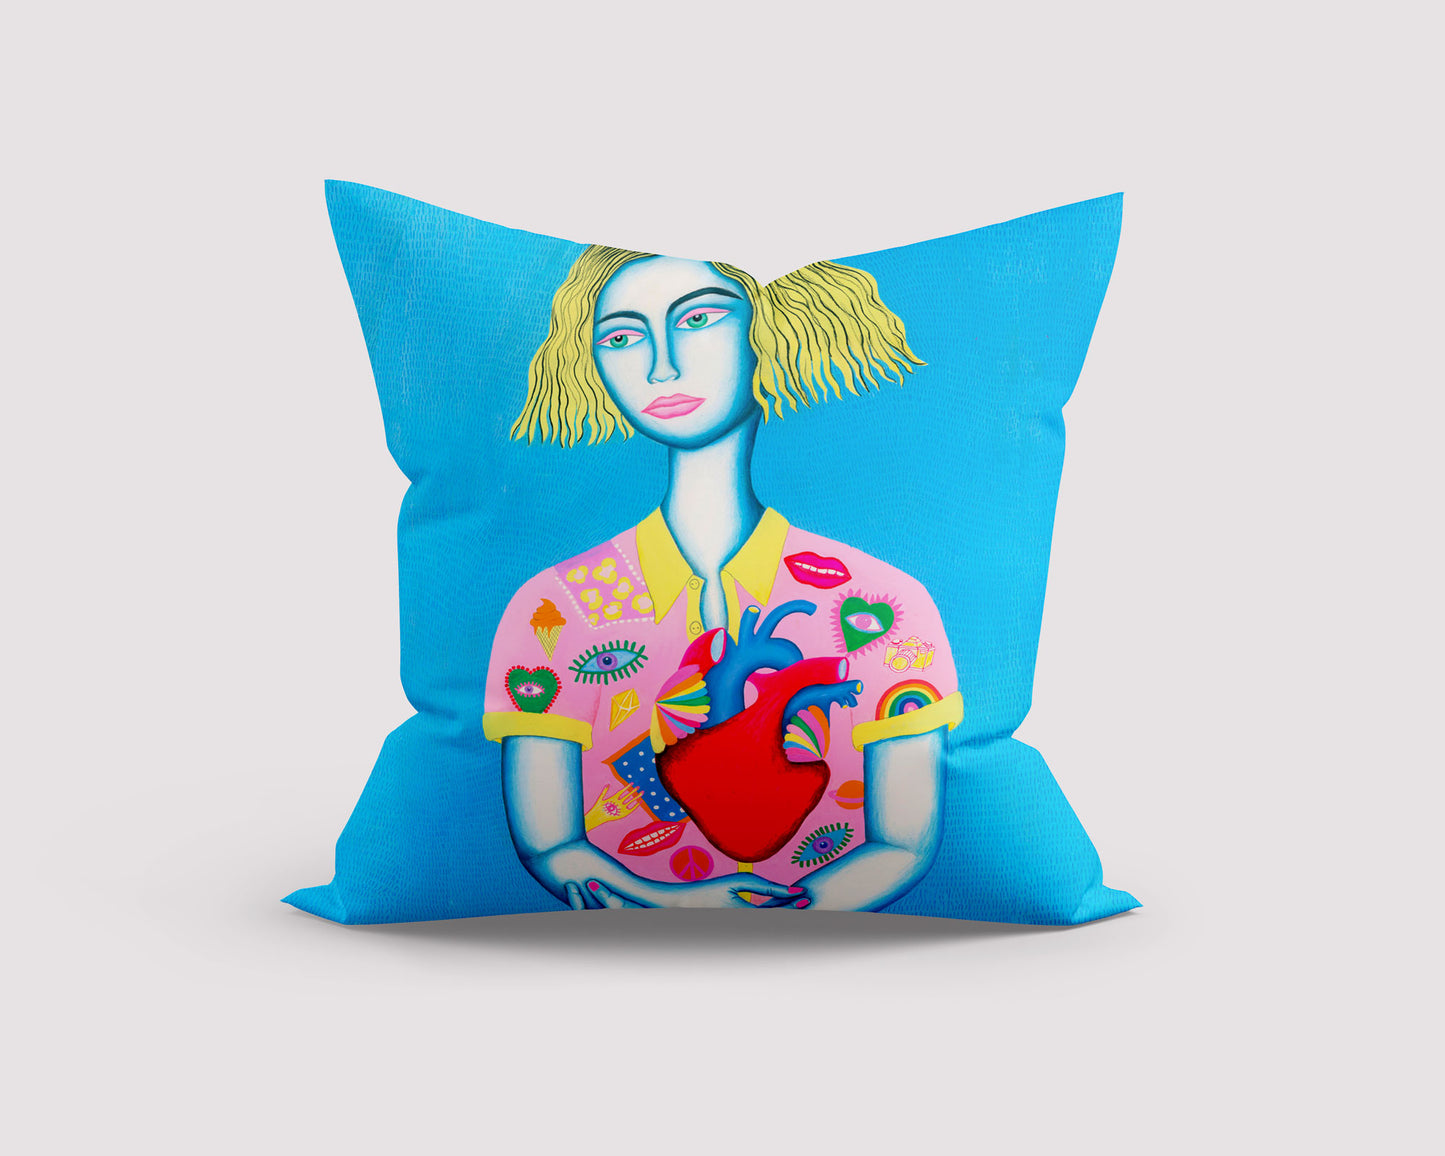 About Love Cushion